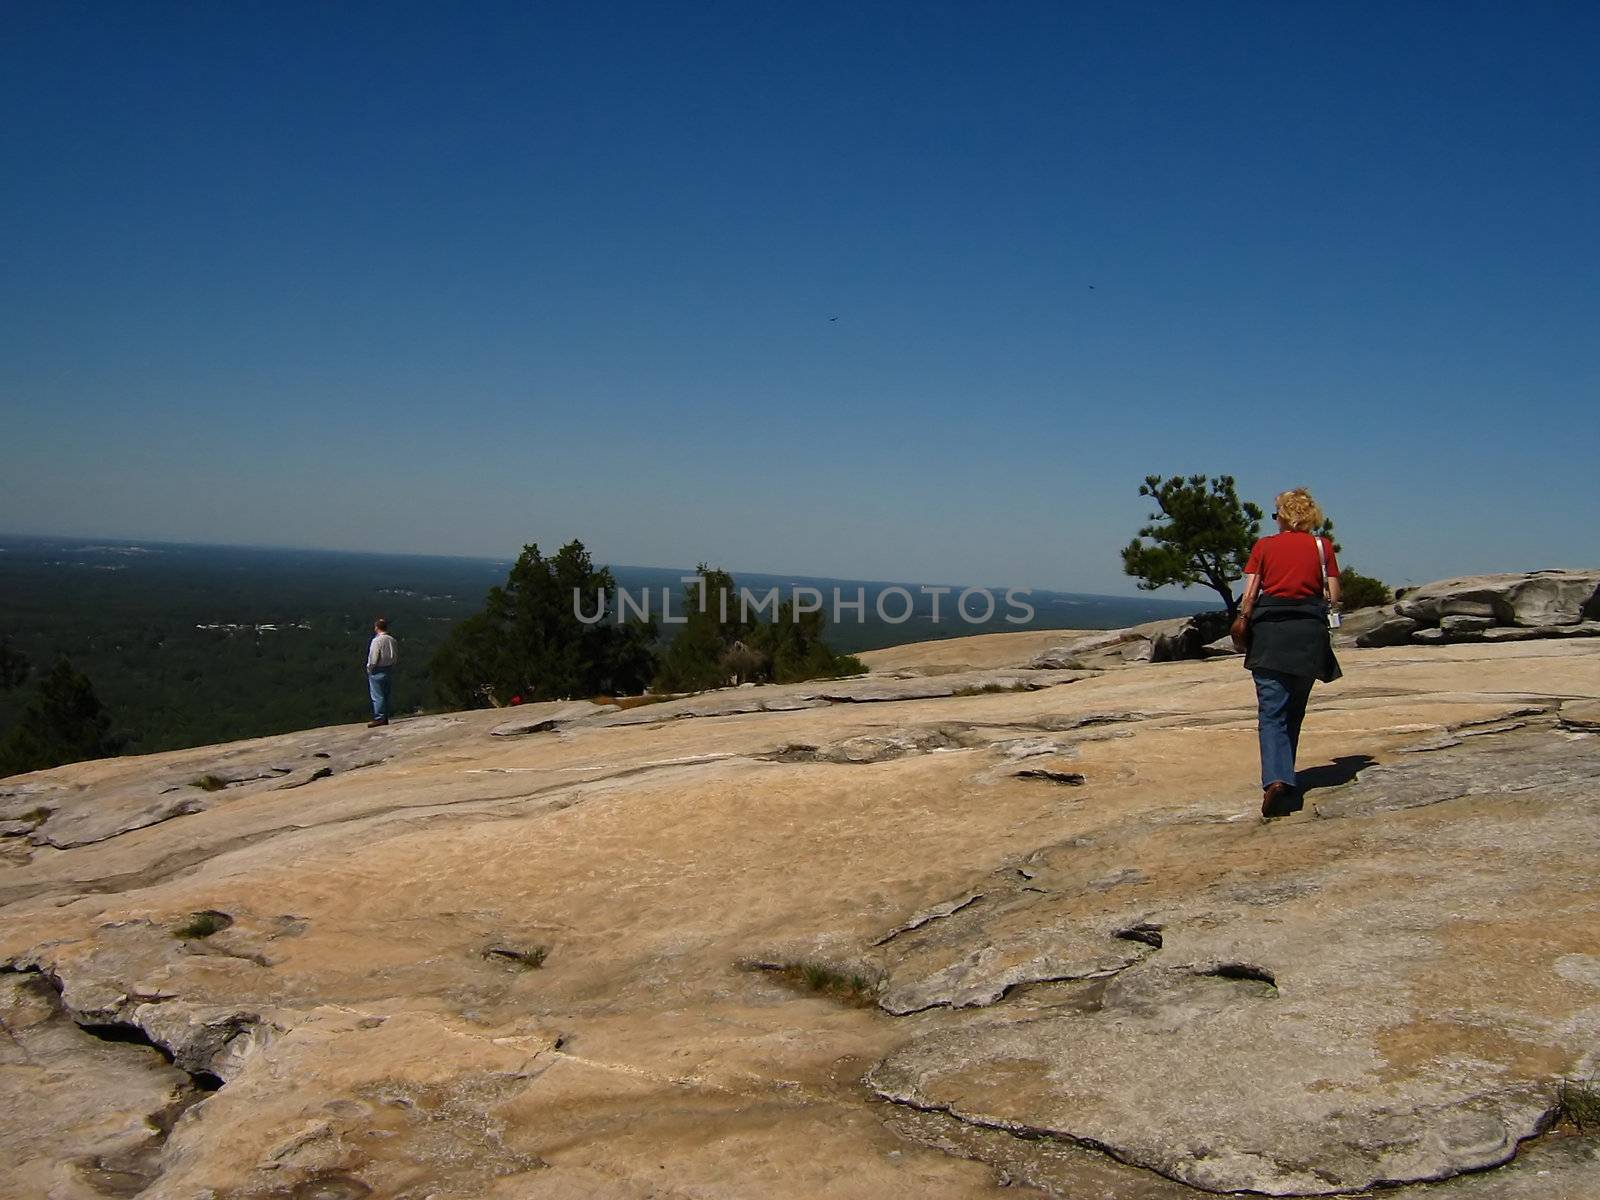 A photograph of a man and woman on top of Stone Mountain. Stone Mountain which is located near the city of Atlanta
in the state of Georgia in the United States, features the largest bas relief sculpture in the world. This sculpture shows Jefferson Davis (president of the U.S. Confederacy circa 1861 - 1865) and Confederate Generals Robert E. Lee 
and Thomas Jonathan "Stonewall" Jackson.